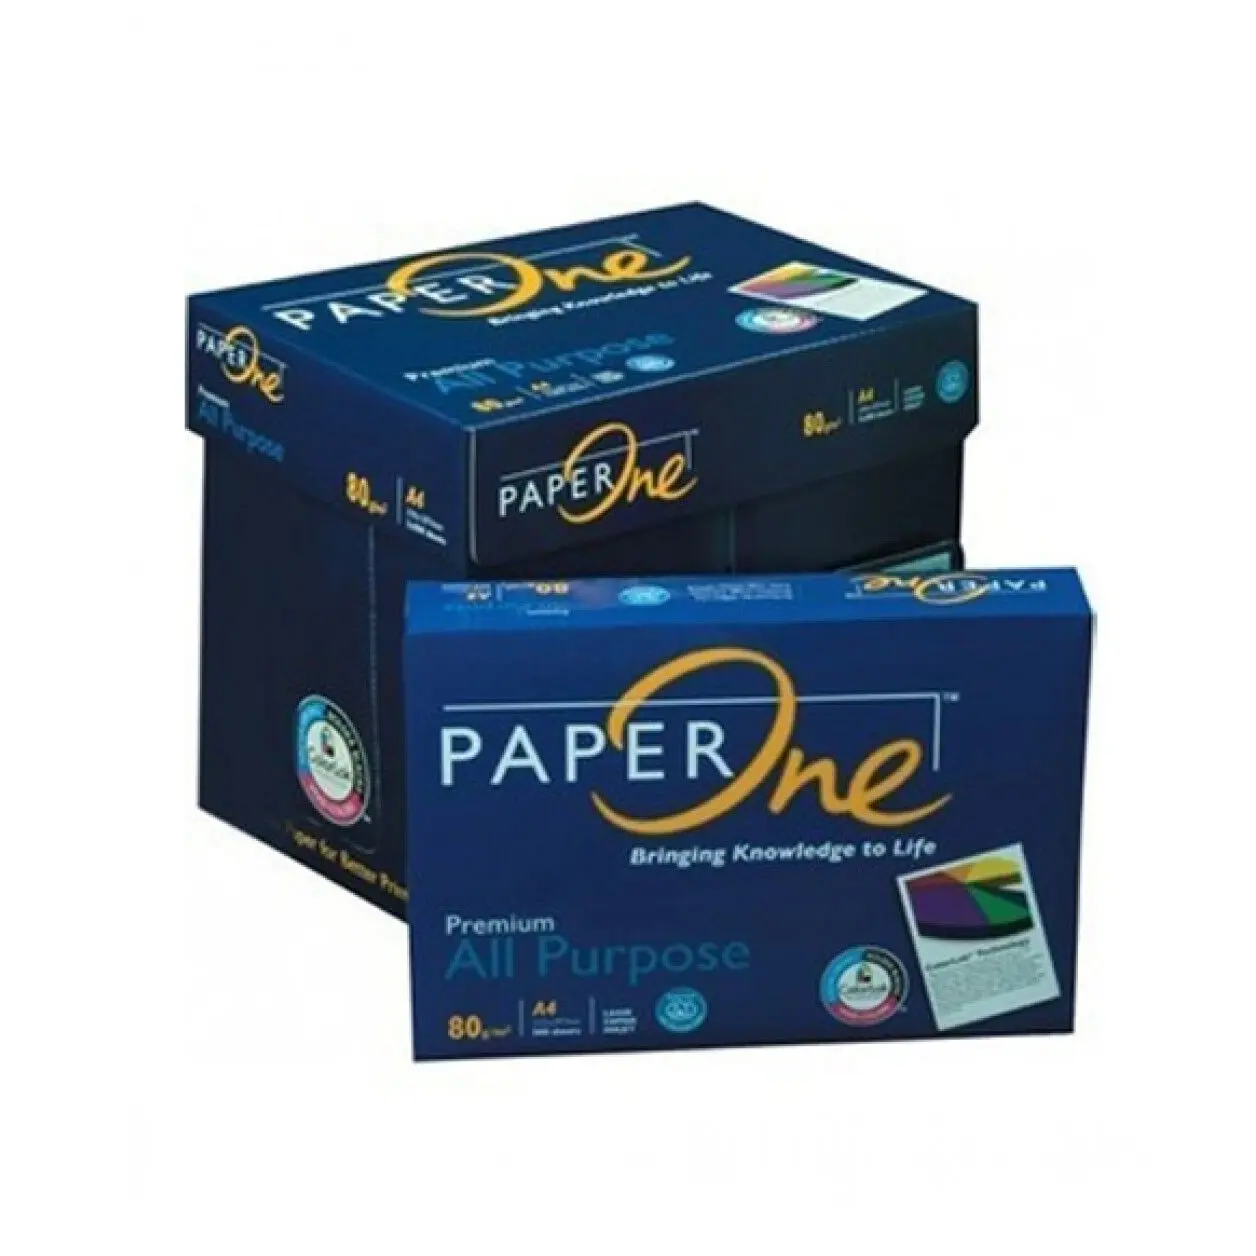 Lowest Price A4 Copy/Printing PaperOne A4 Copy Paper 70gsm / 75gsm /80gsm Premium Quality Bulk Quantity For Exports From Europe